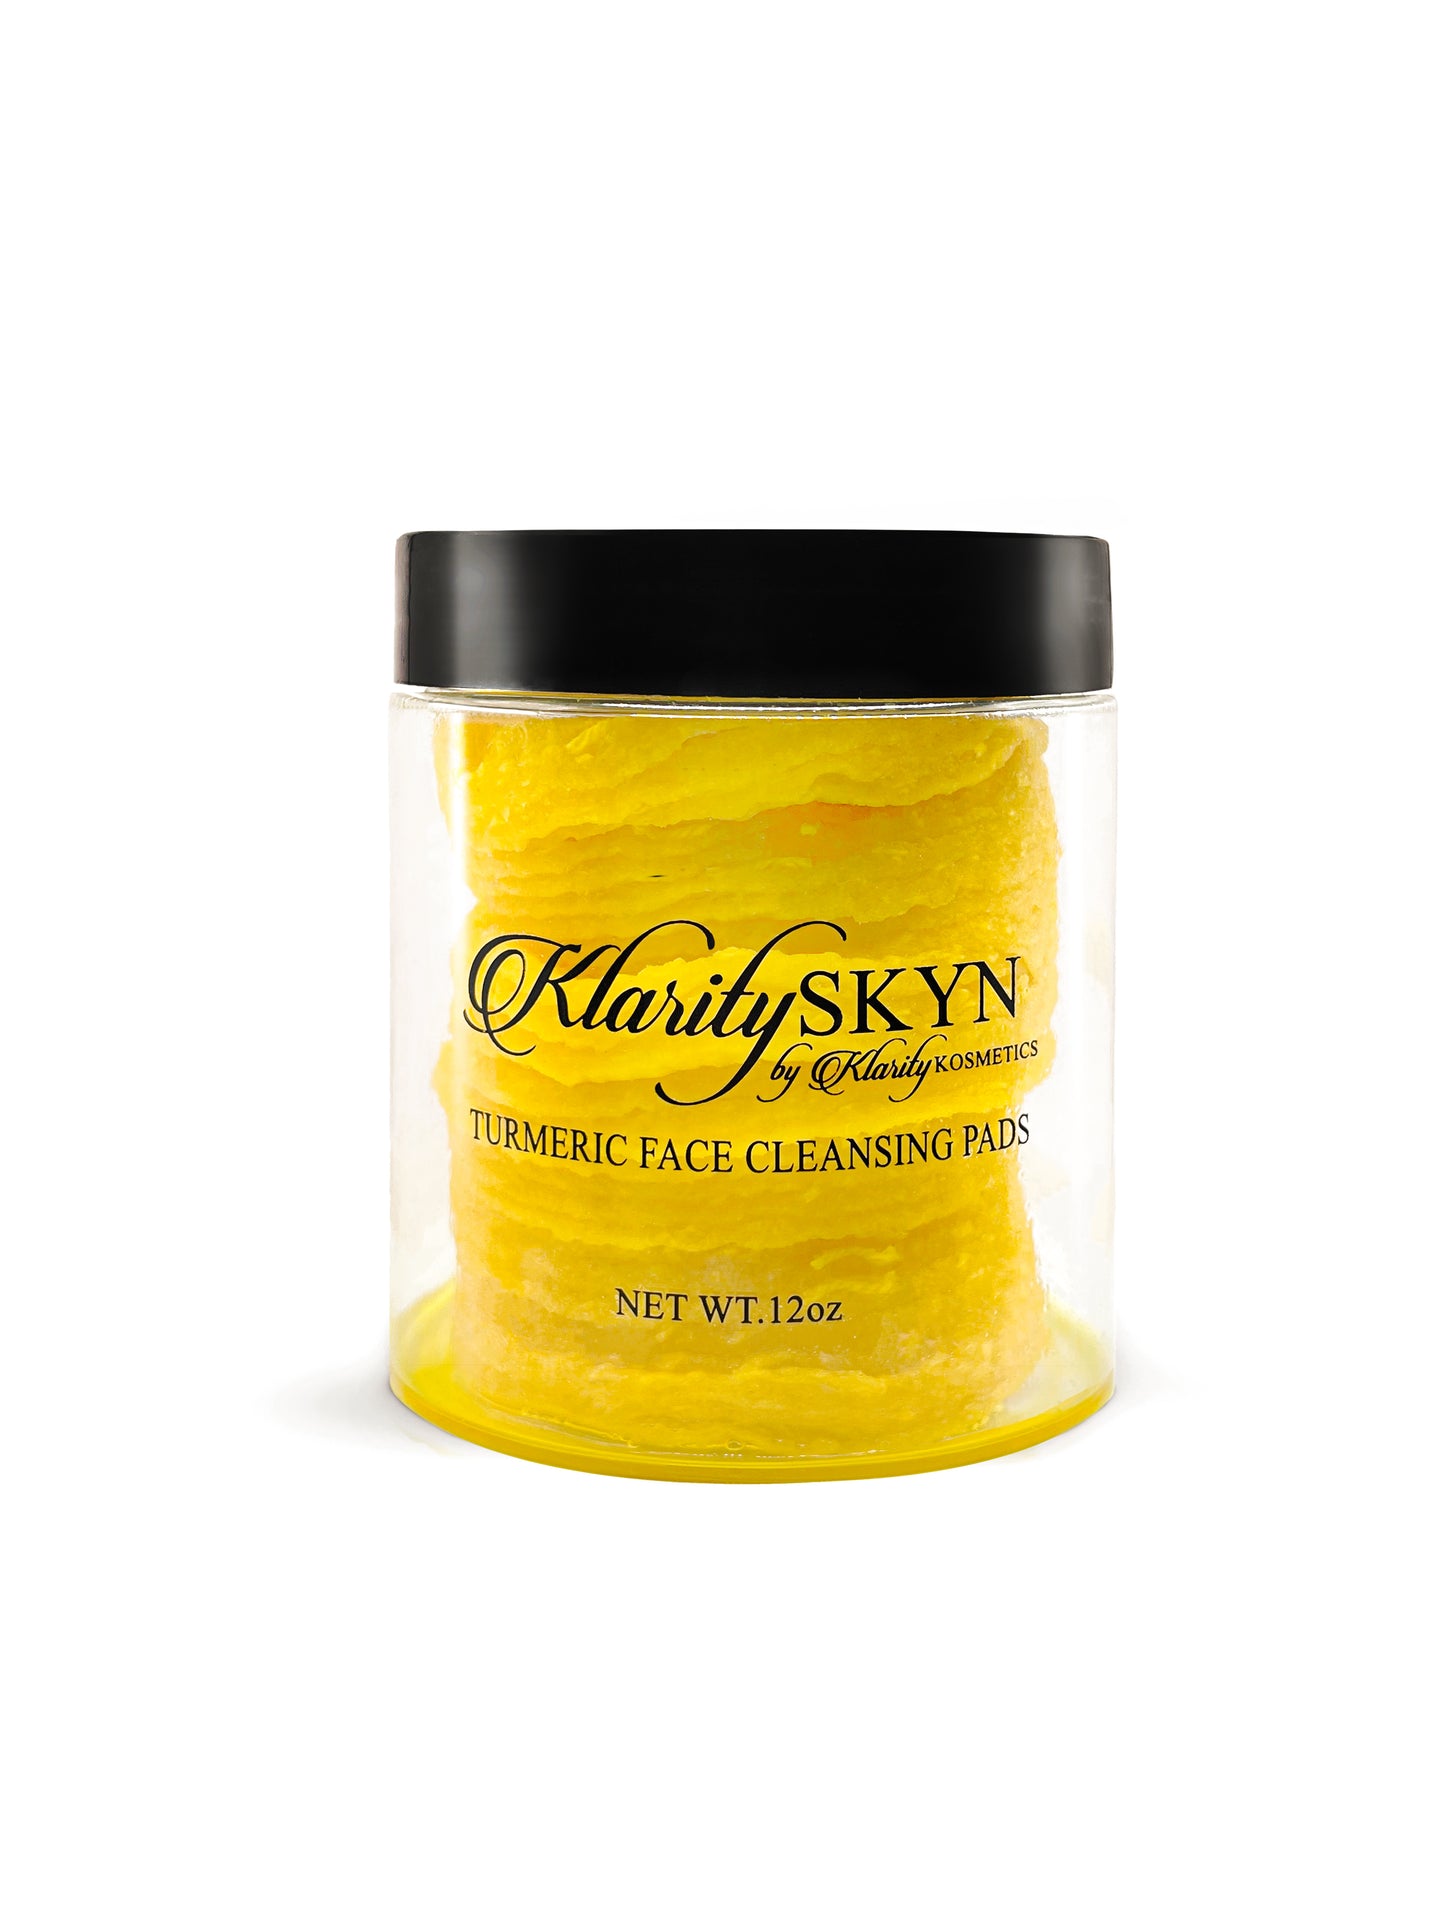 TURMERIC FACE CLEANSING PADS